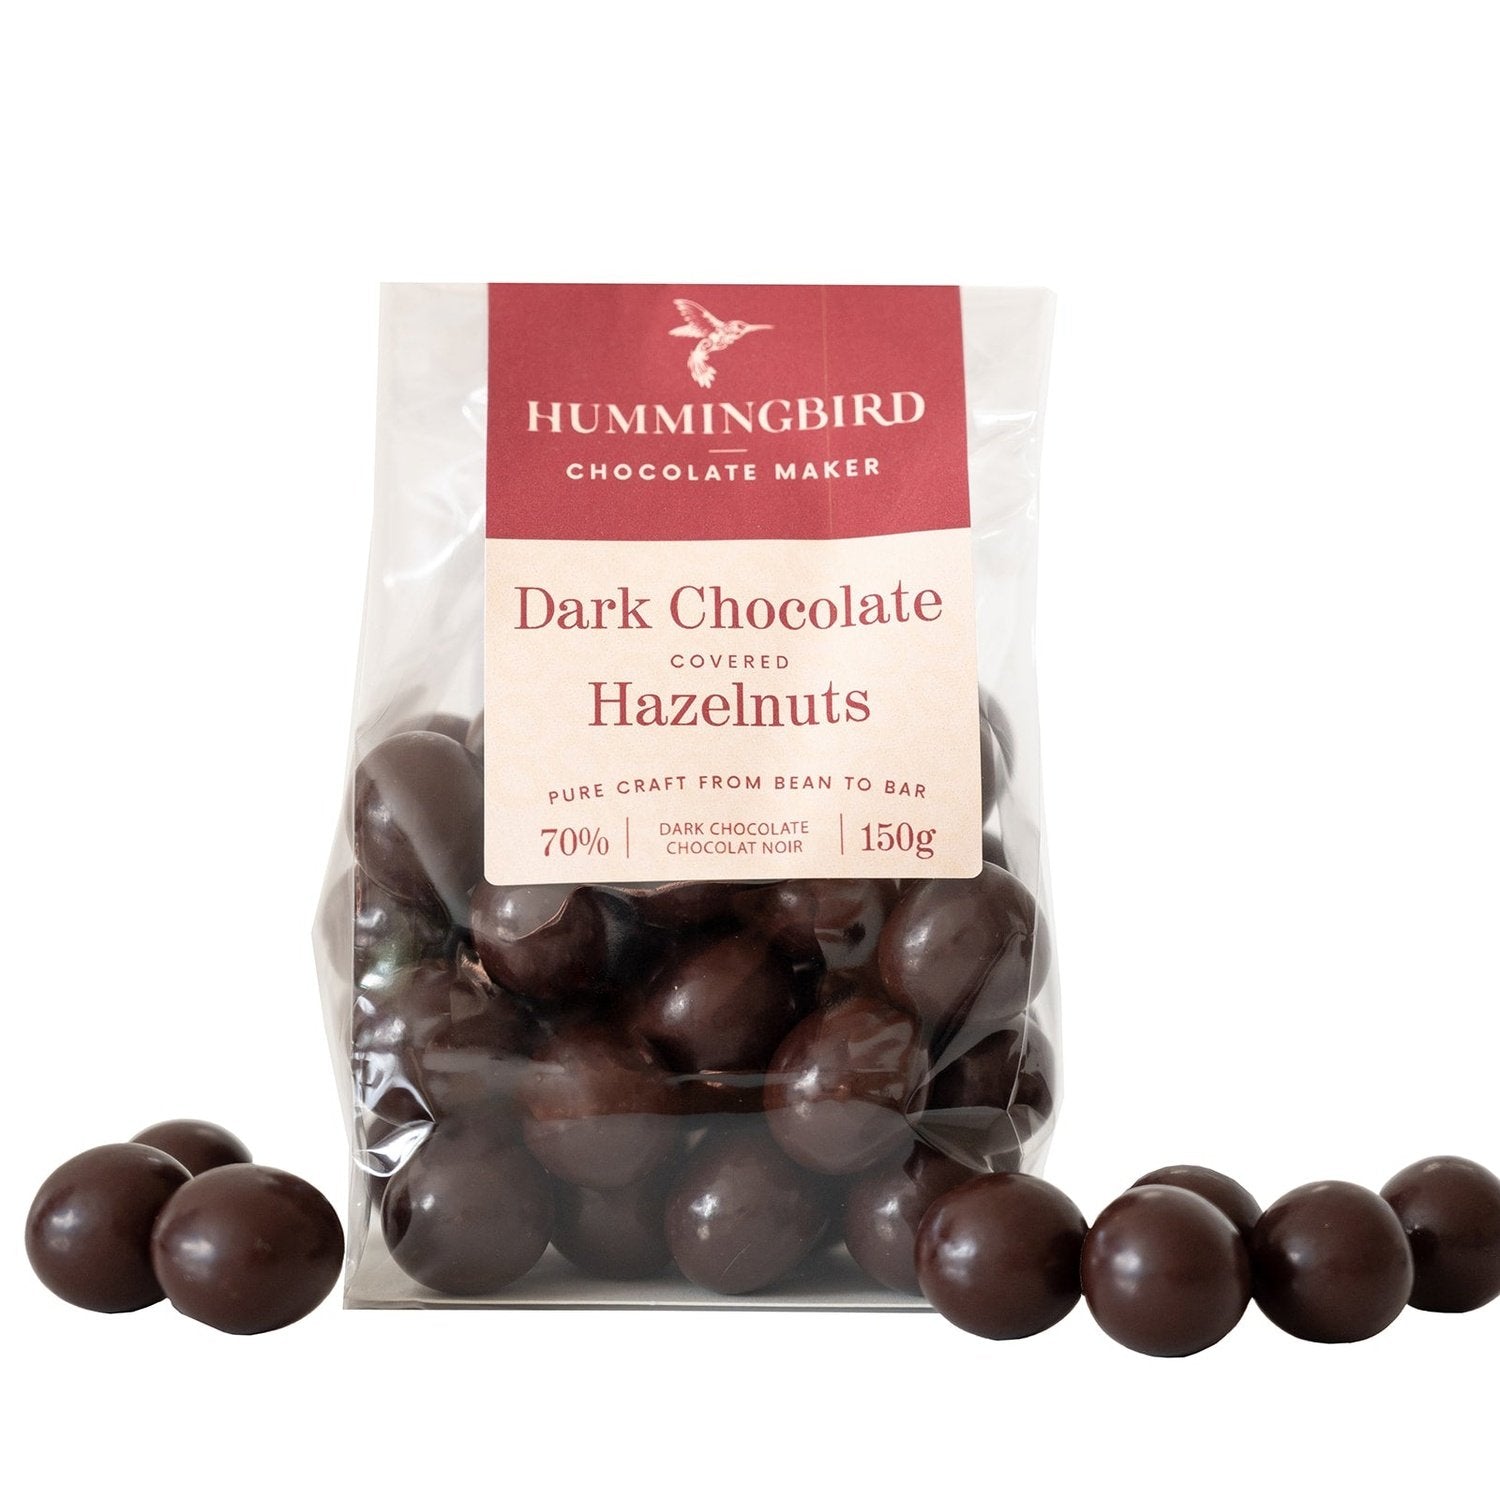 Whole roasted hazelnuts covered in dark chocolate beside wrapped package of Dark Chocolate Covered Hazelnuts by Hummingbird Chocolate Maker